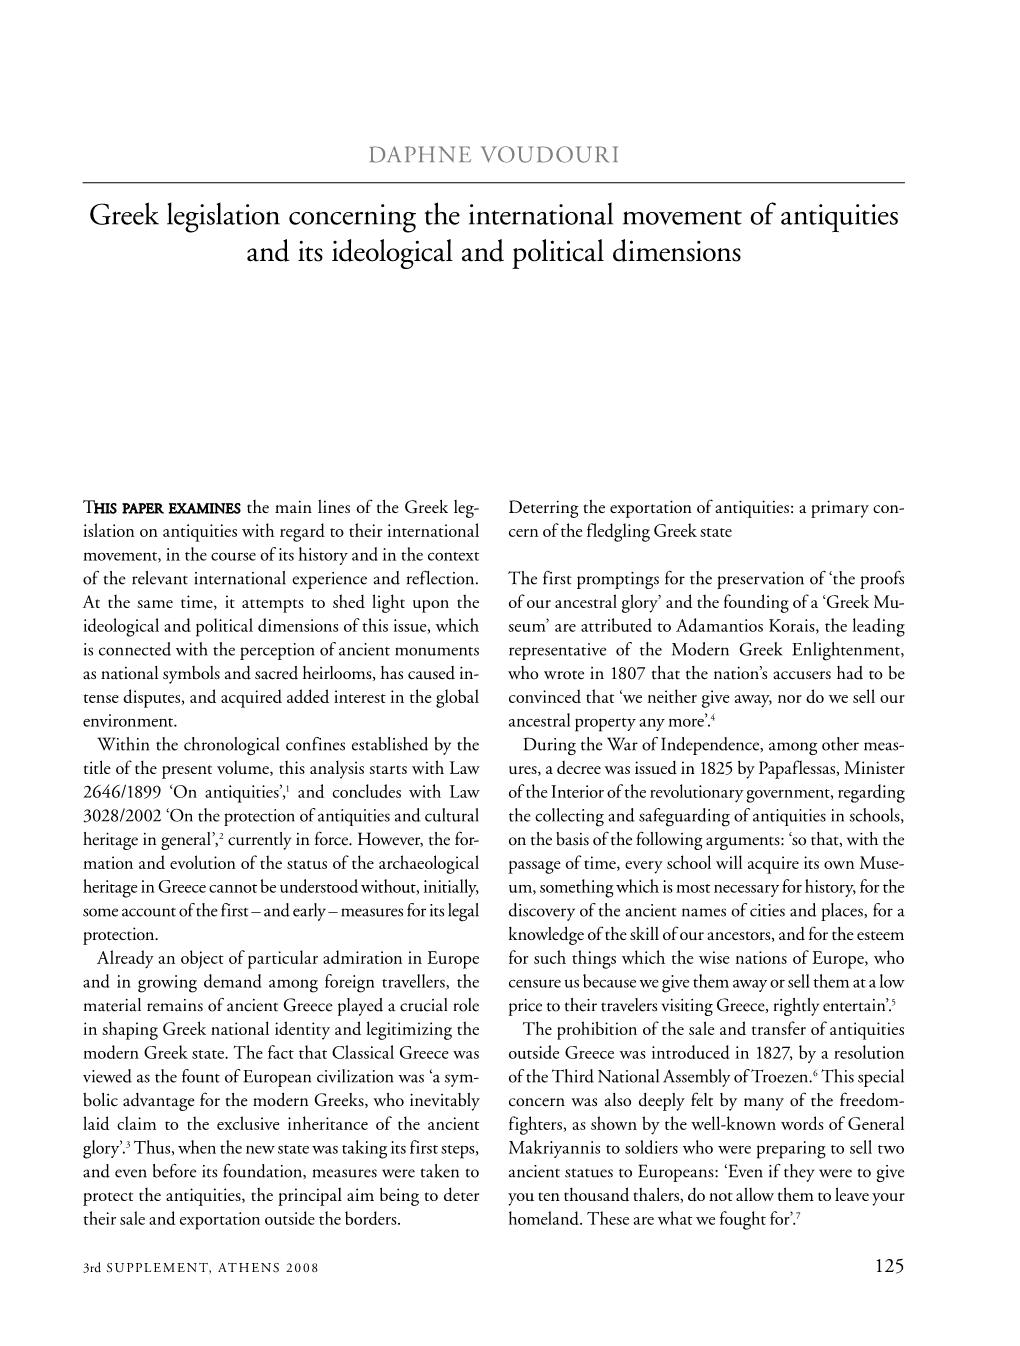 Greek Legislation Concerning the International Movement of Antiquities and Its Ideological and Political Dimensions